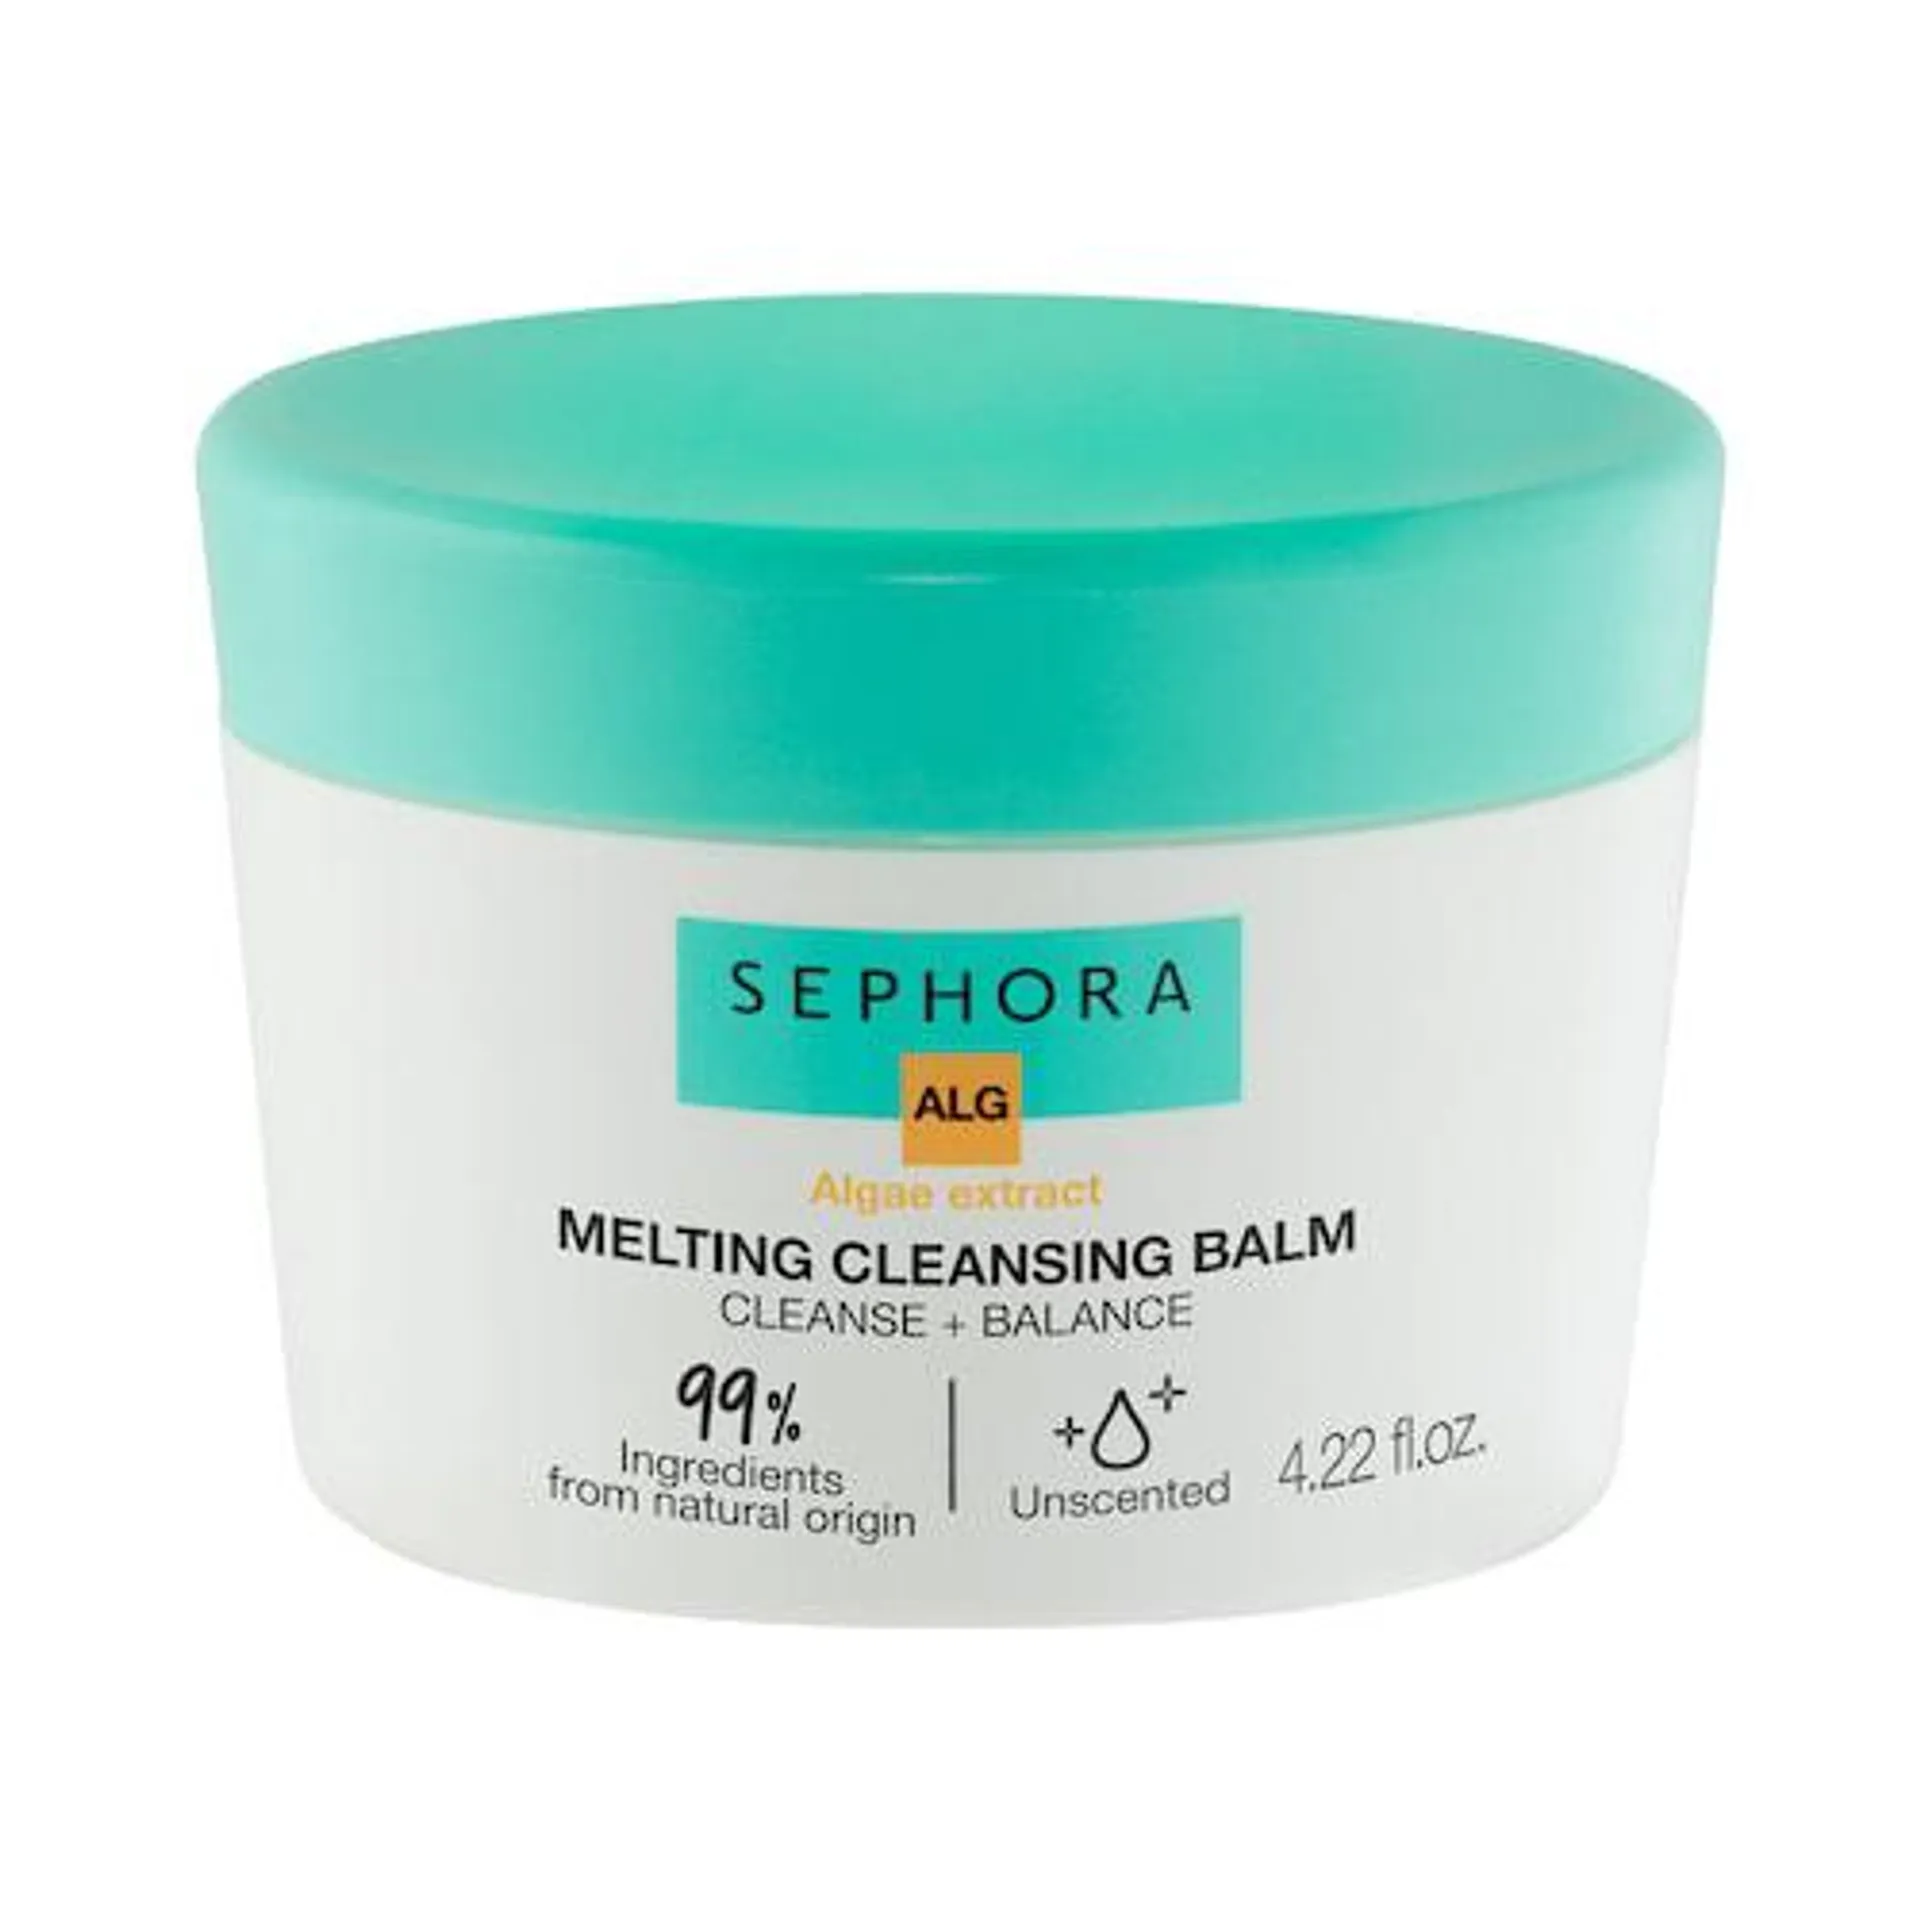 Melting Cleansing Balm with Algae Extract